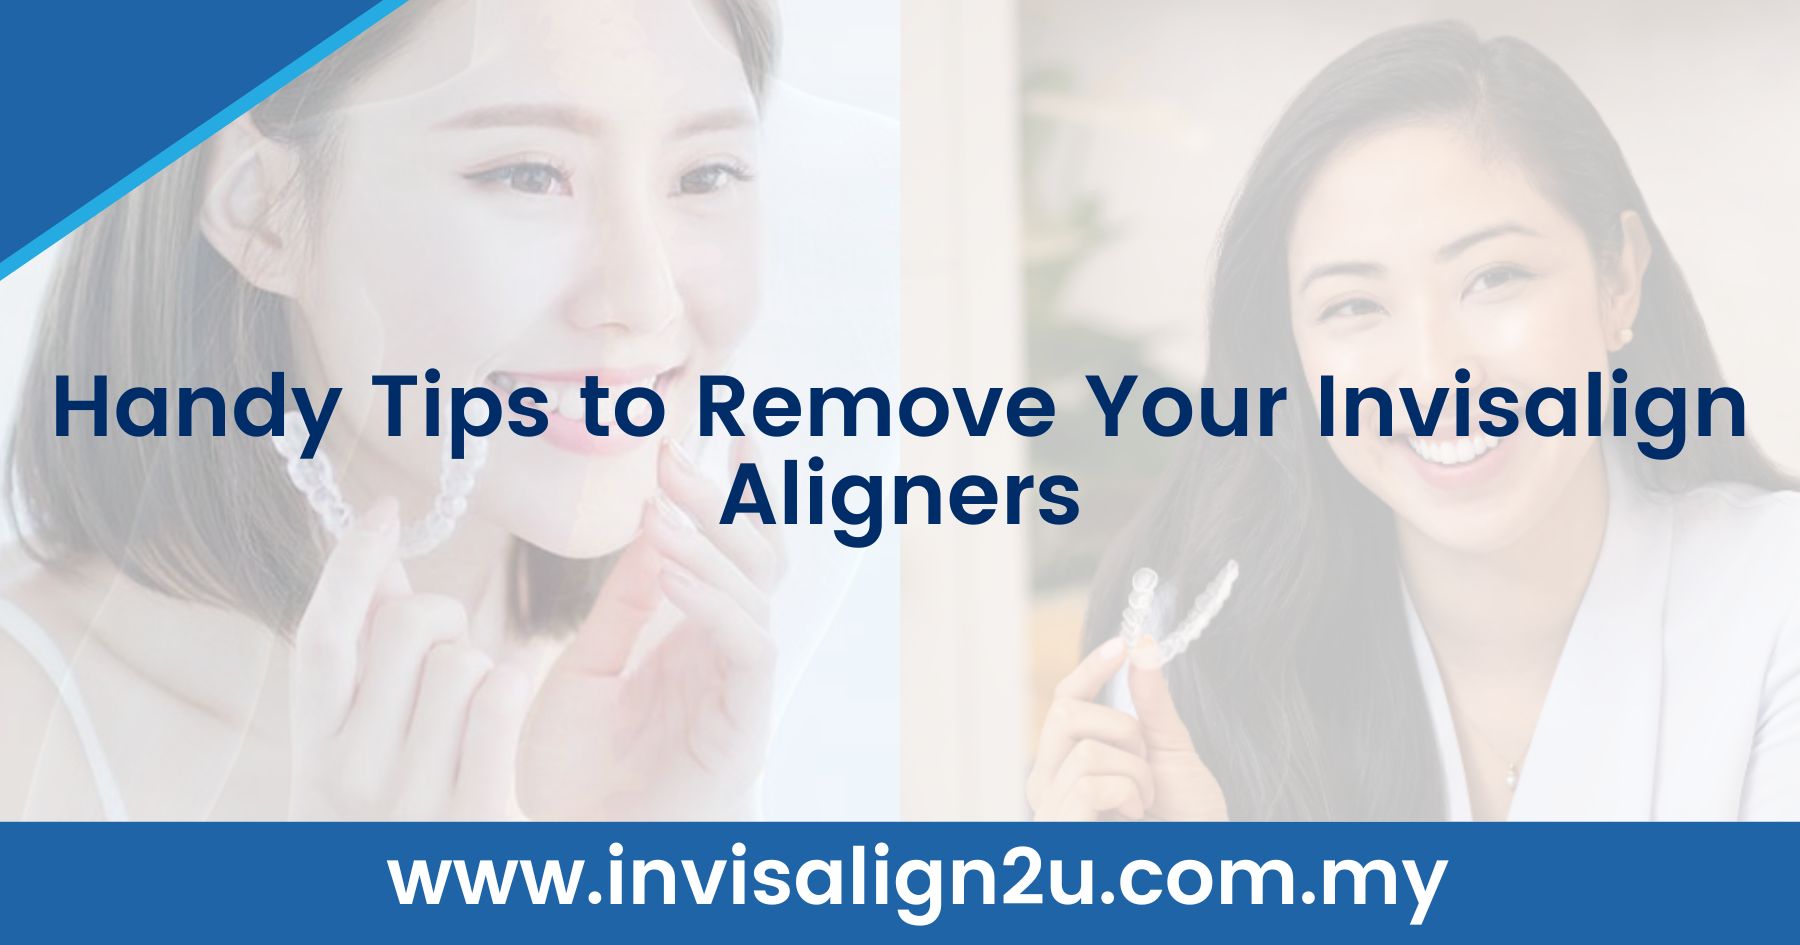 Handy Tips to Remove Your Invisalign Aligners